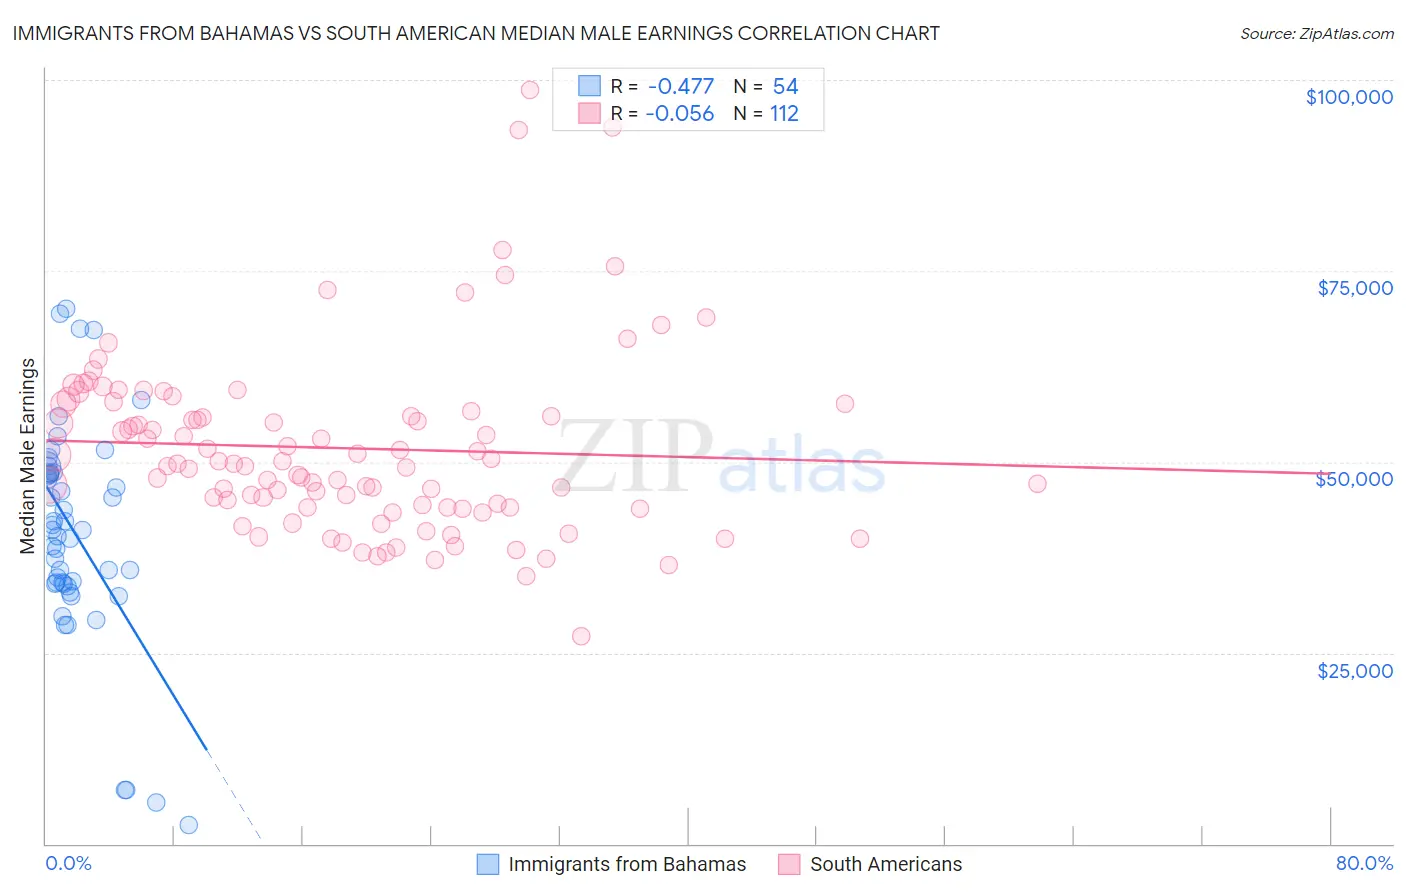 Immigrants from Bahamas vs South American Median Male Earnings